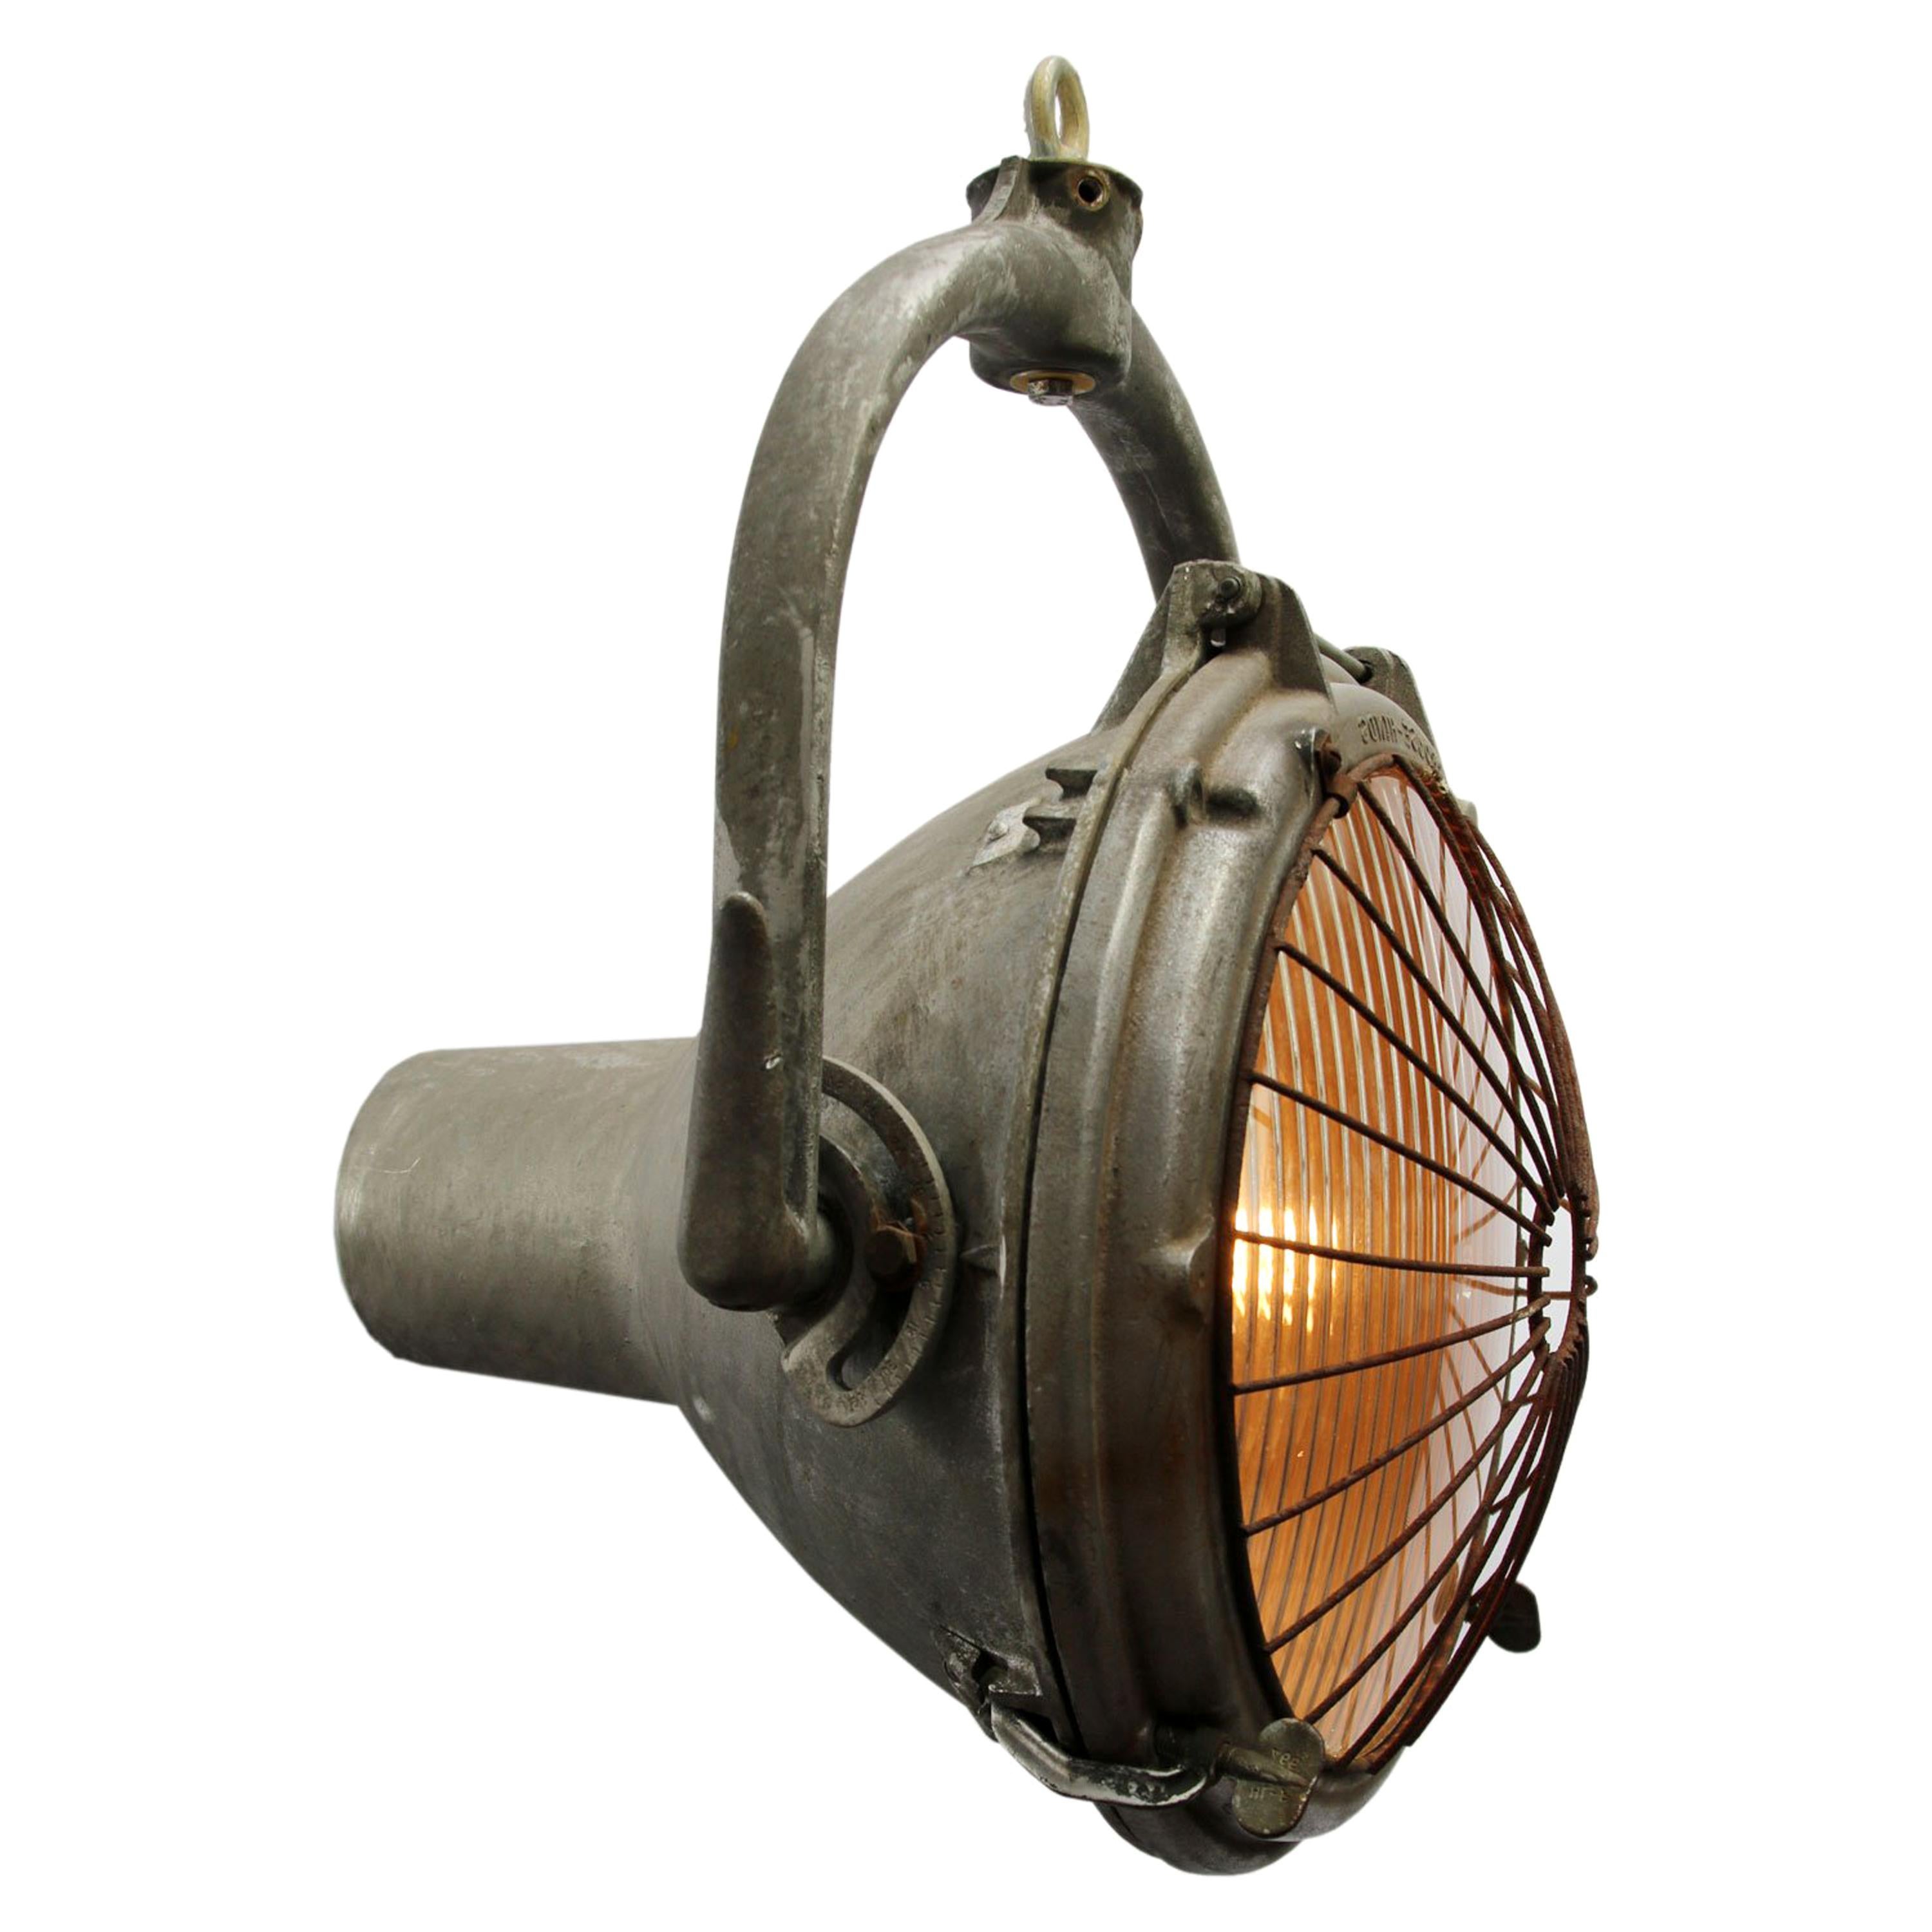 Cast Aluminum Vintage Industrial Striped Glass Crouse-Hinds Hanging Spot Light